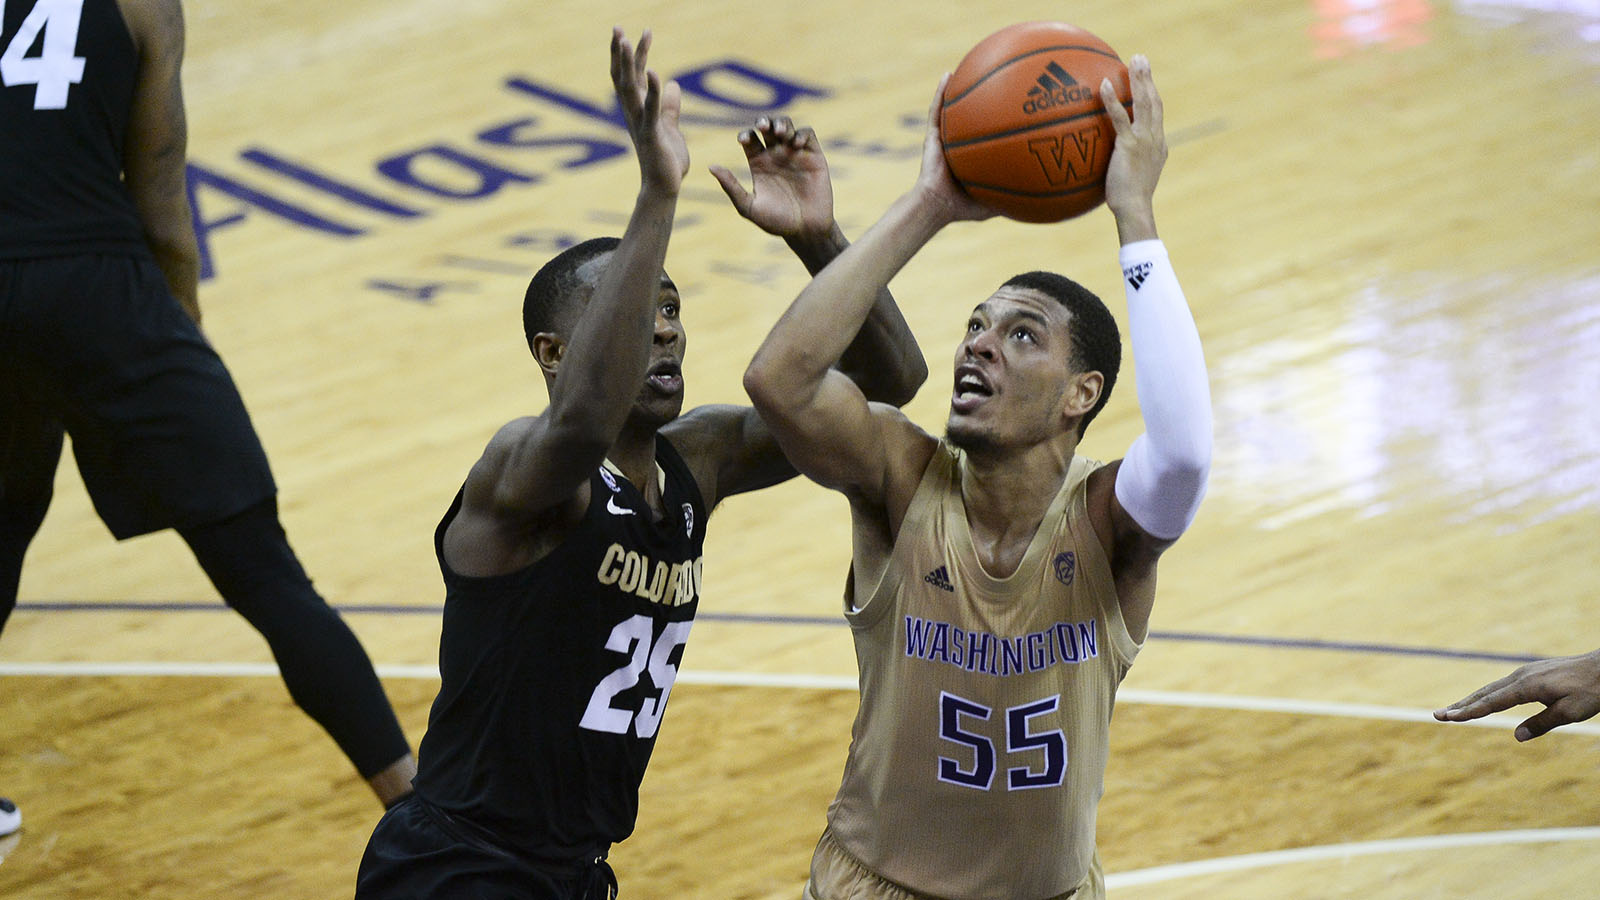 Colorado Buffaloes guard McKinley Wright IV defends against Washington Huskies guard Quade Green during a Pac-12 conference college basketball game between the Colorado Buffaloes and the Washington Huskies on Jan. 20, 2021, at Hec Edmundson Pavilion in Seattle.